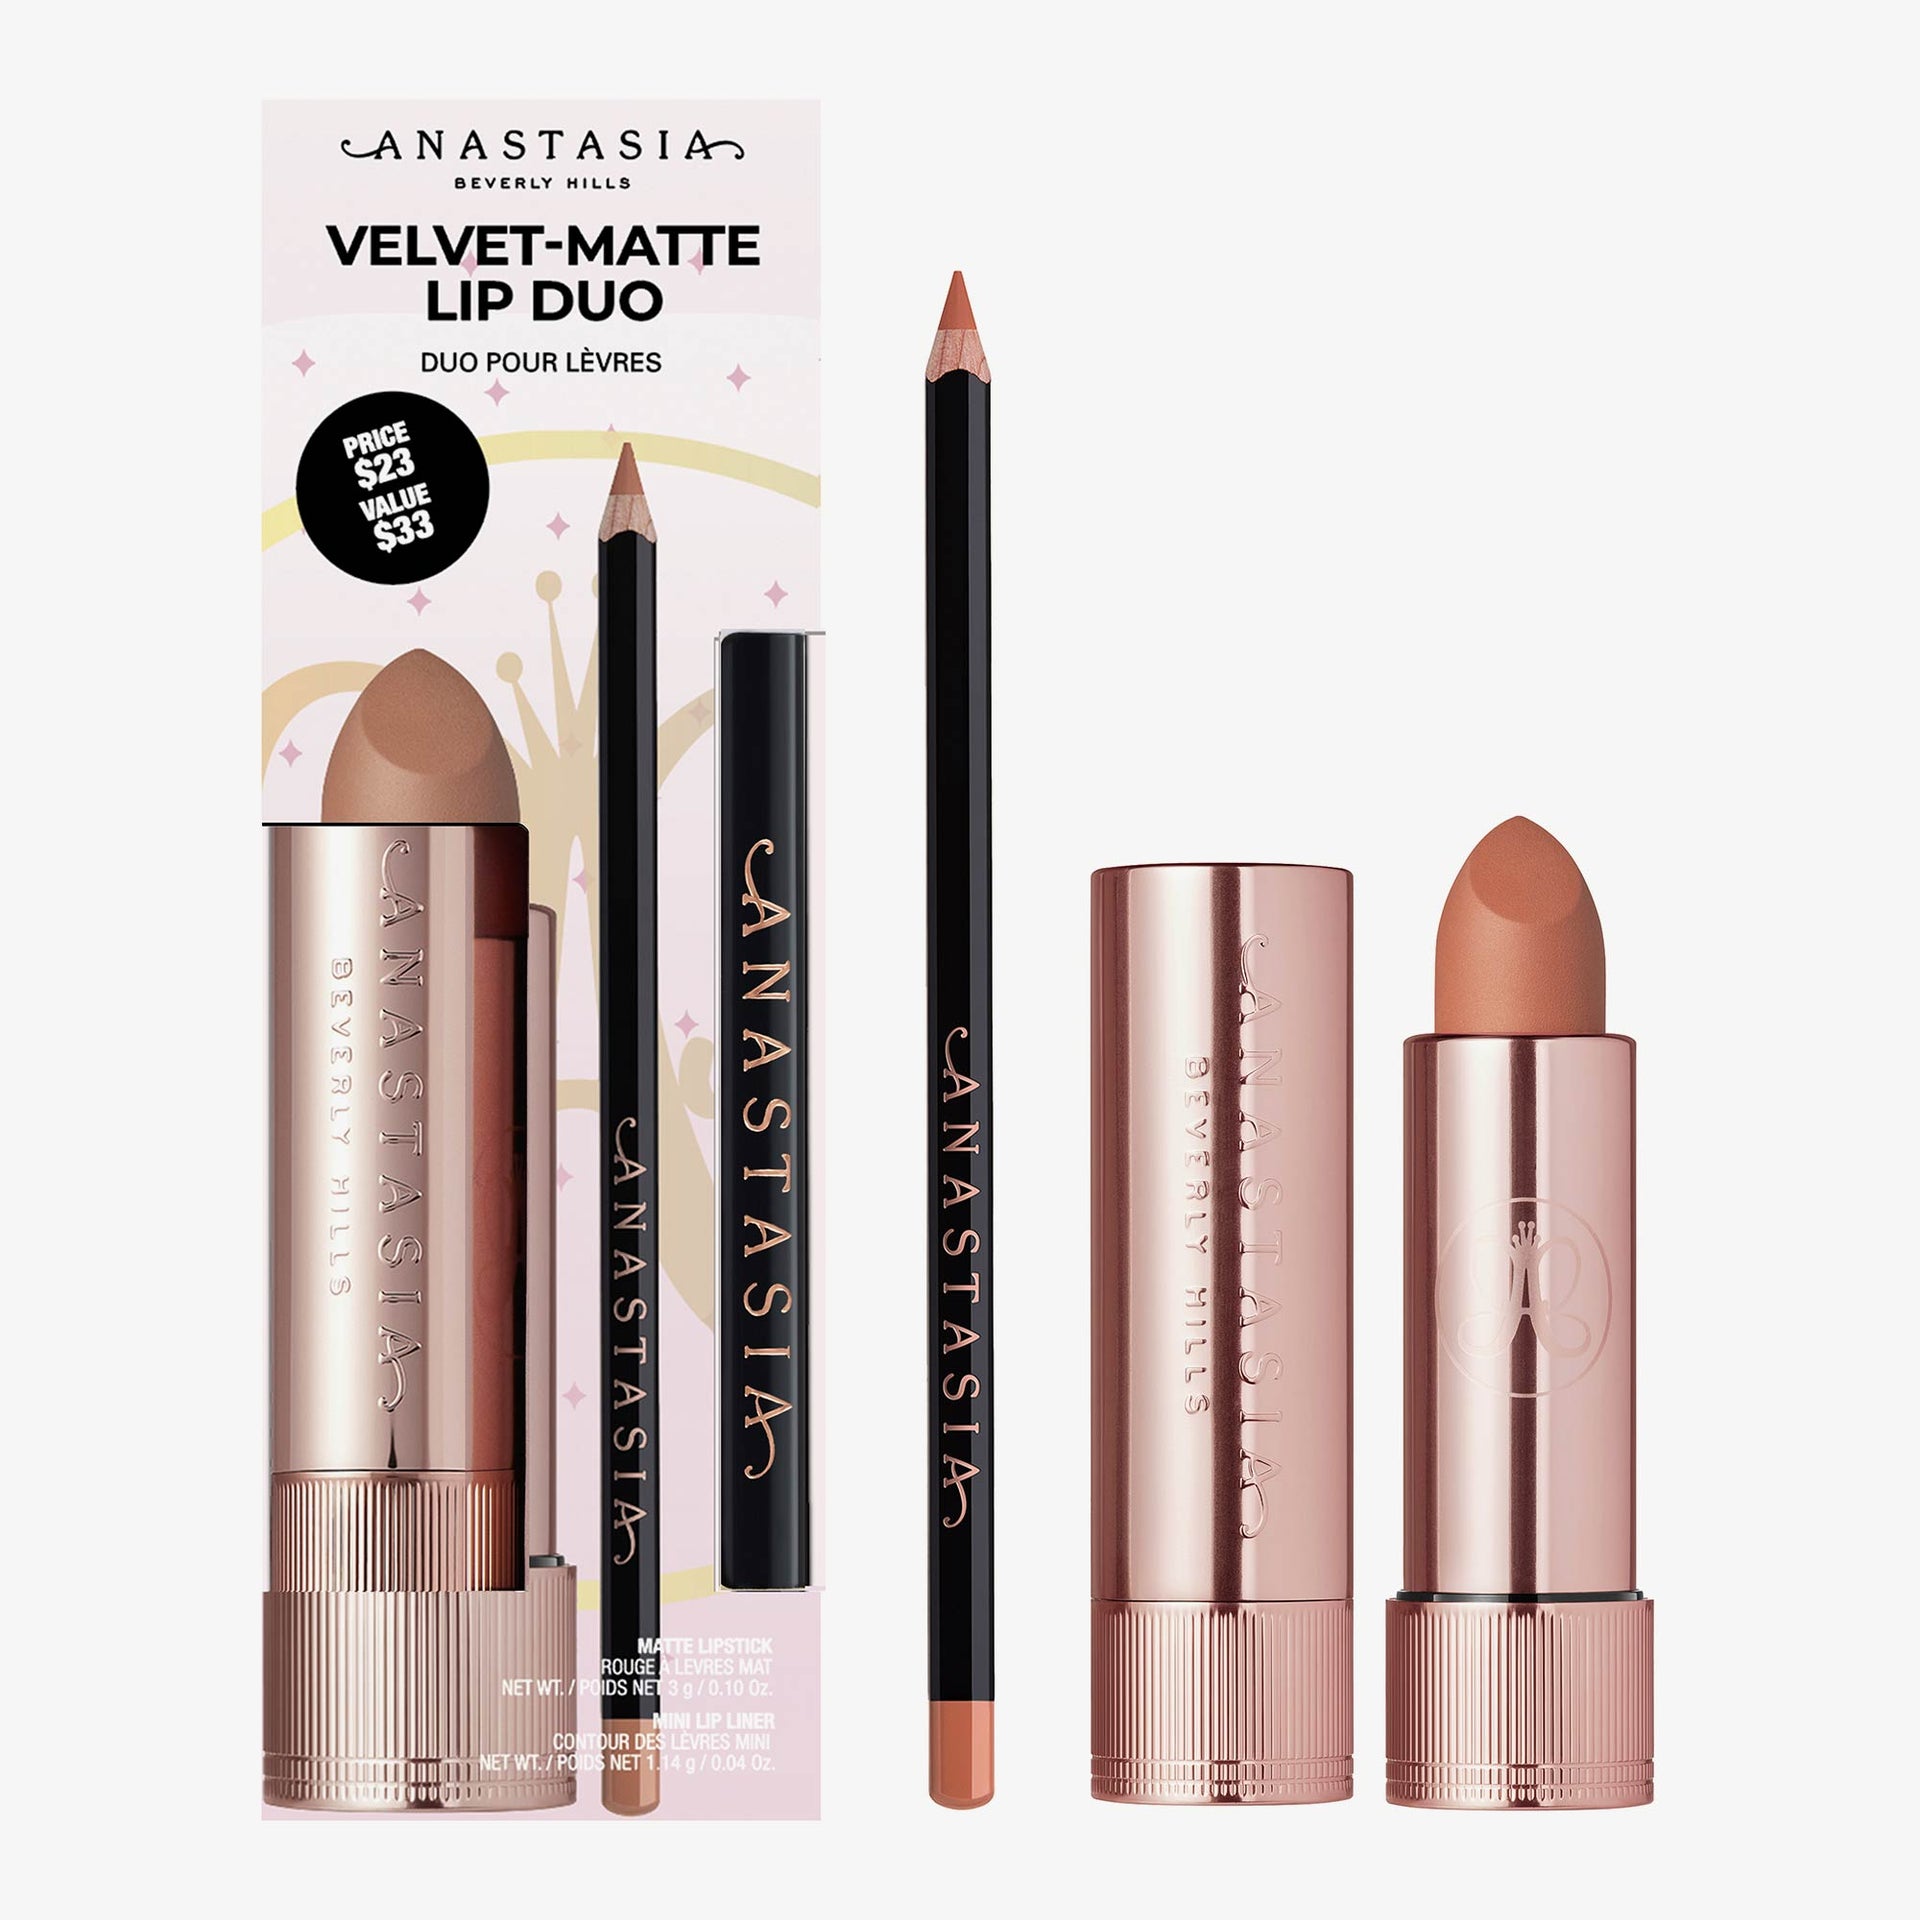 Warm Taupe & Warm Taupe |Velvet-Matte Lip Duo - Warm Taupe & Warm Taupe